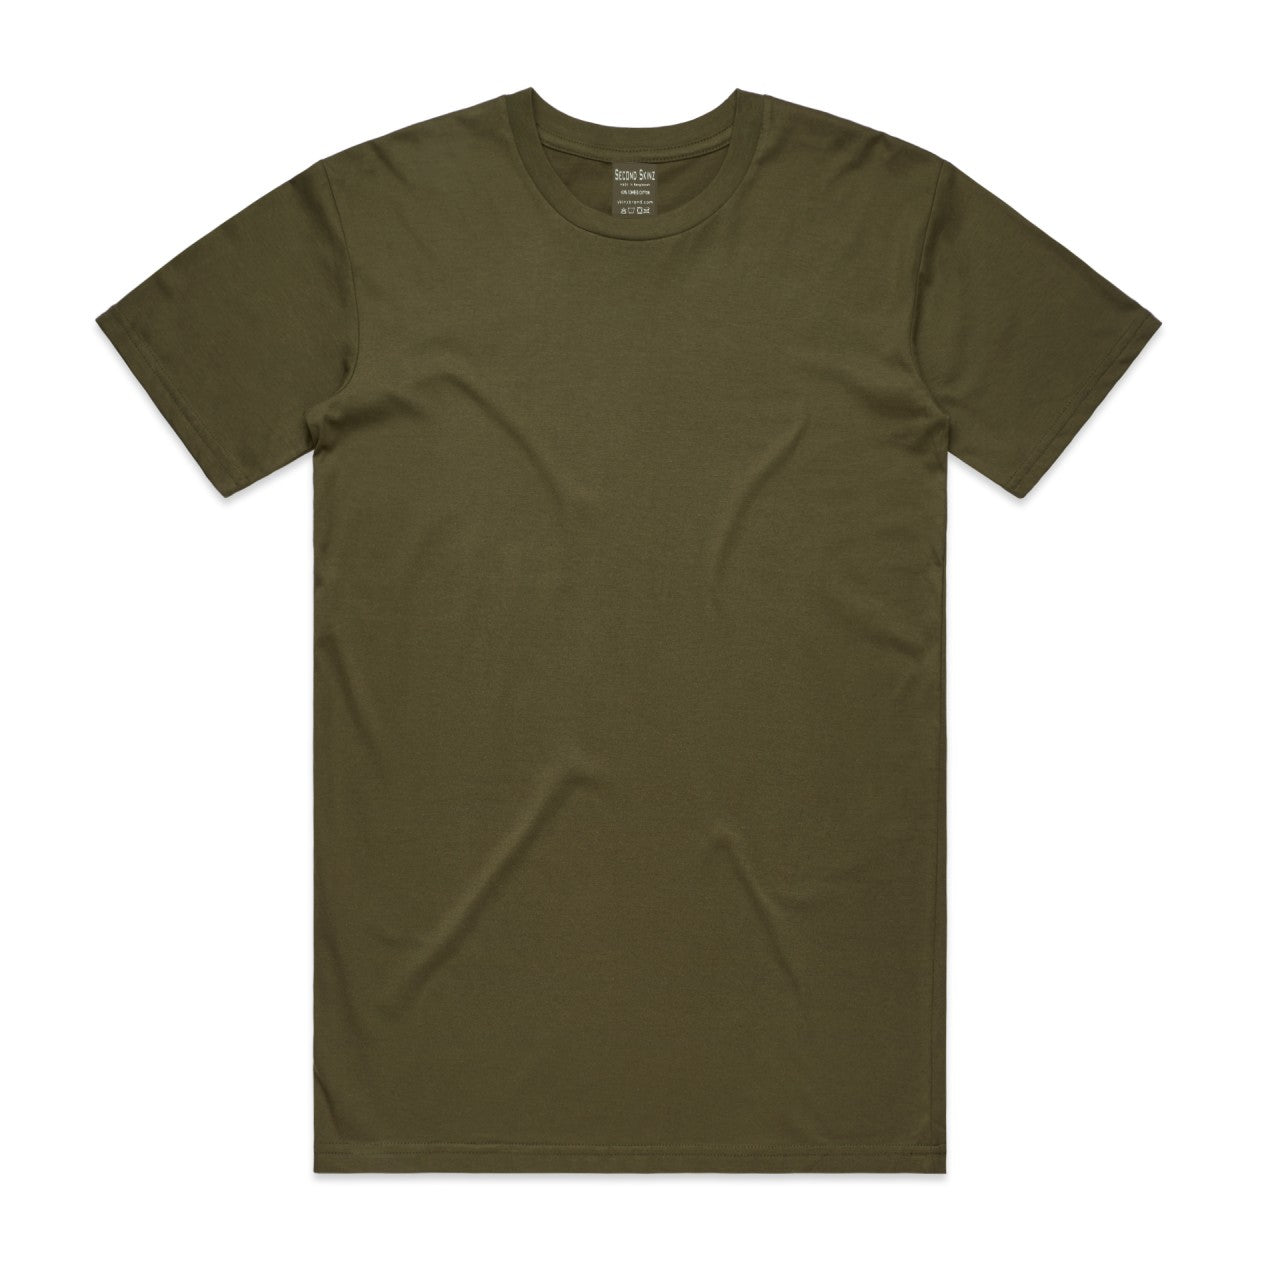 This medium weighted Army Iconic Classic T-Shirt from Second Skinz